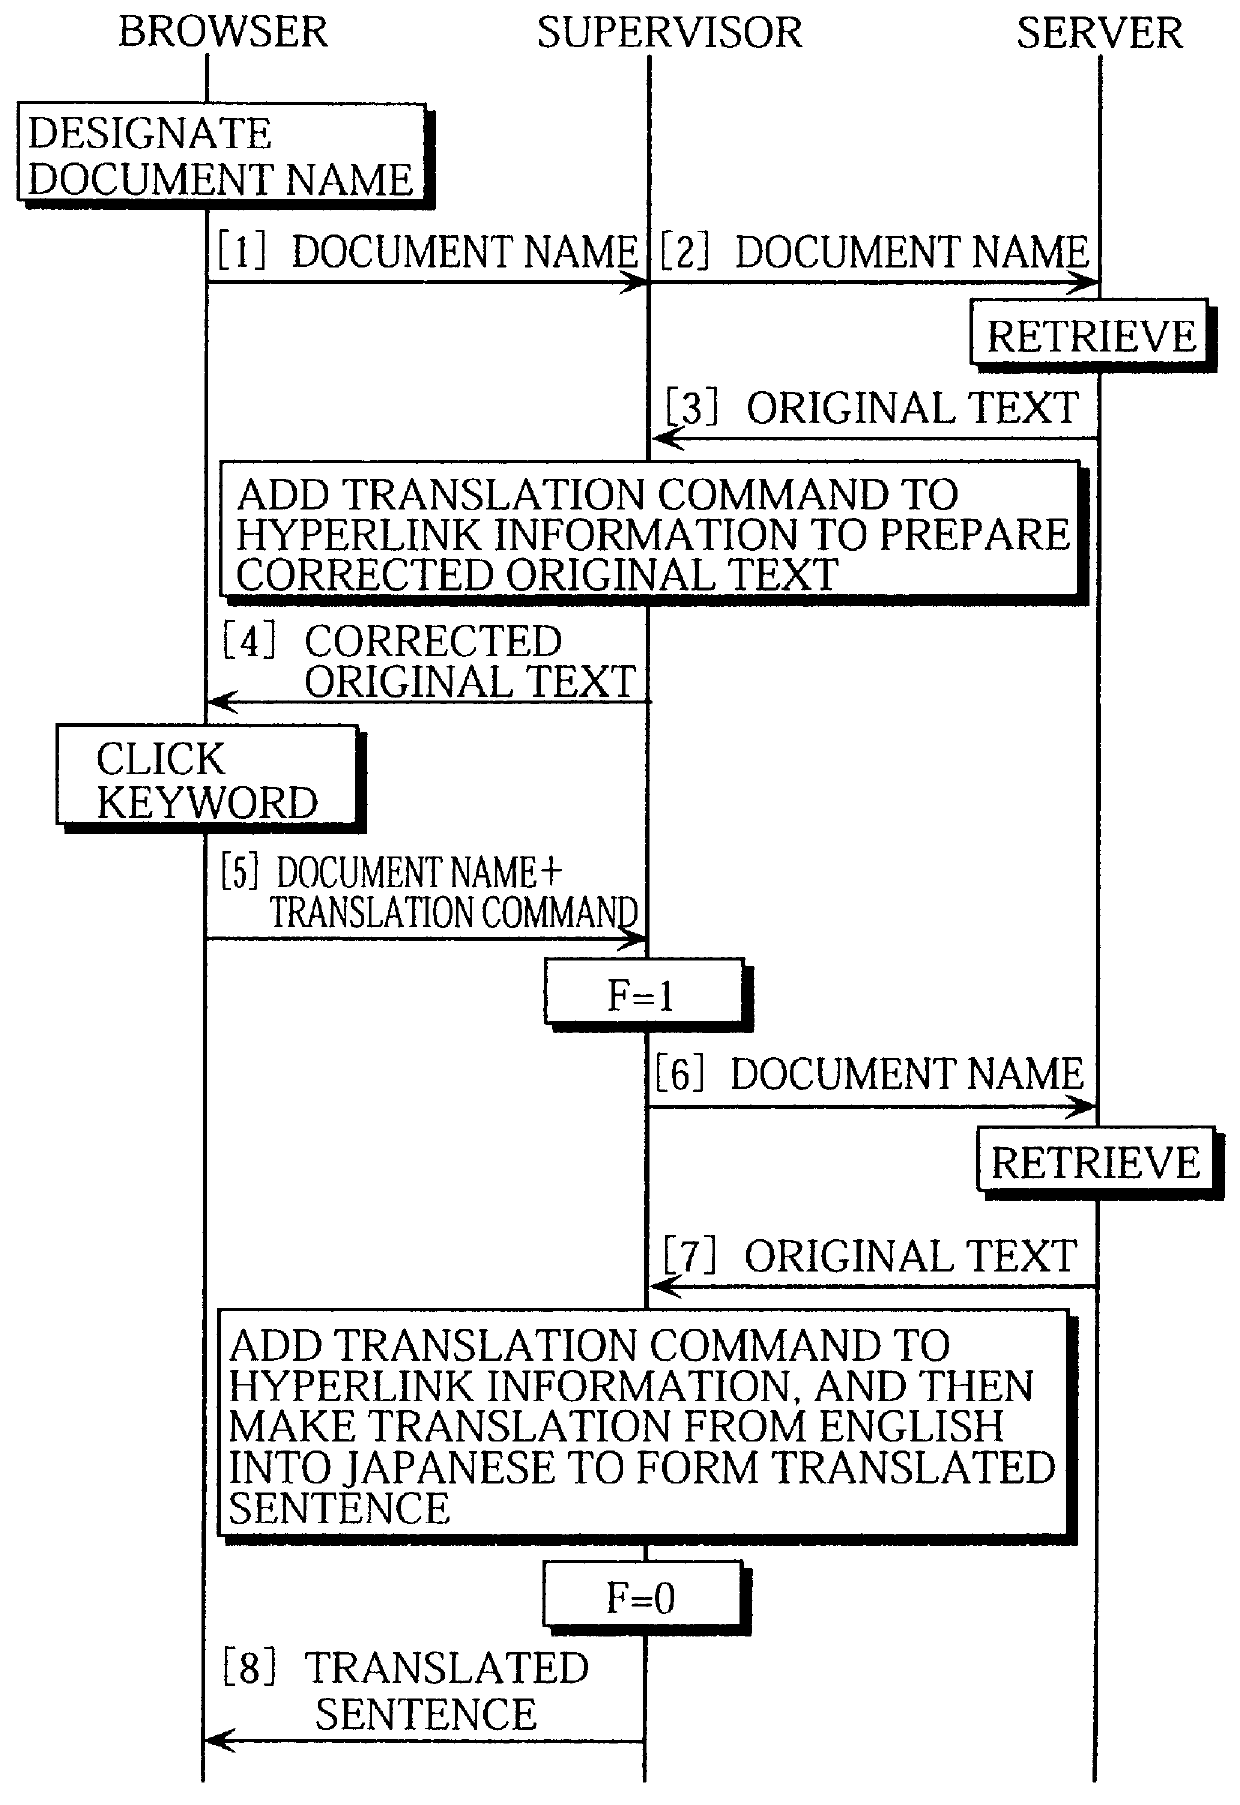 Document conversion system including data monitoring means that adds tag information to hyperlink information and translates a document when such tag information is included in a document retrieval request